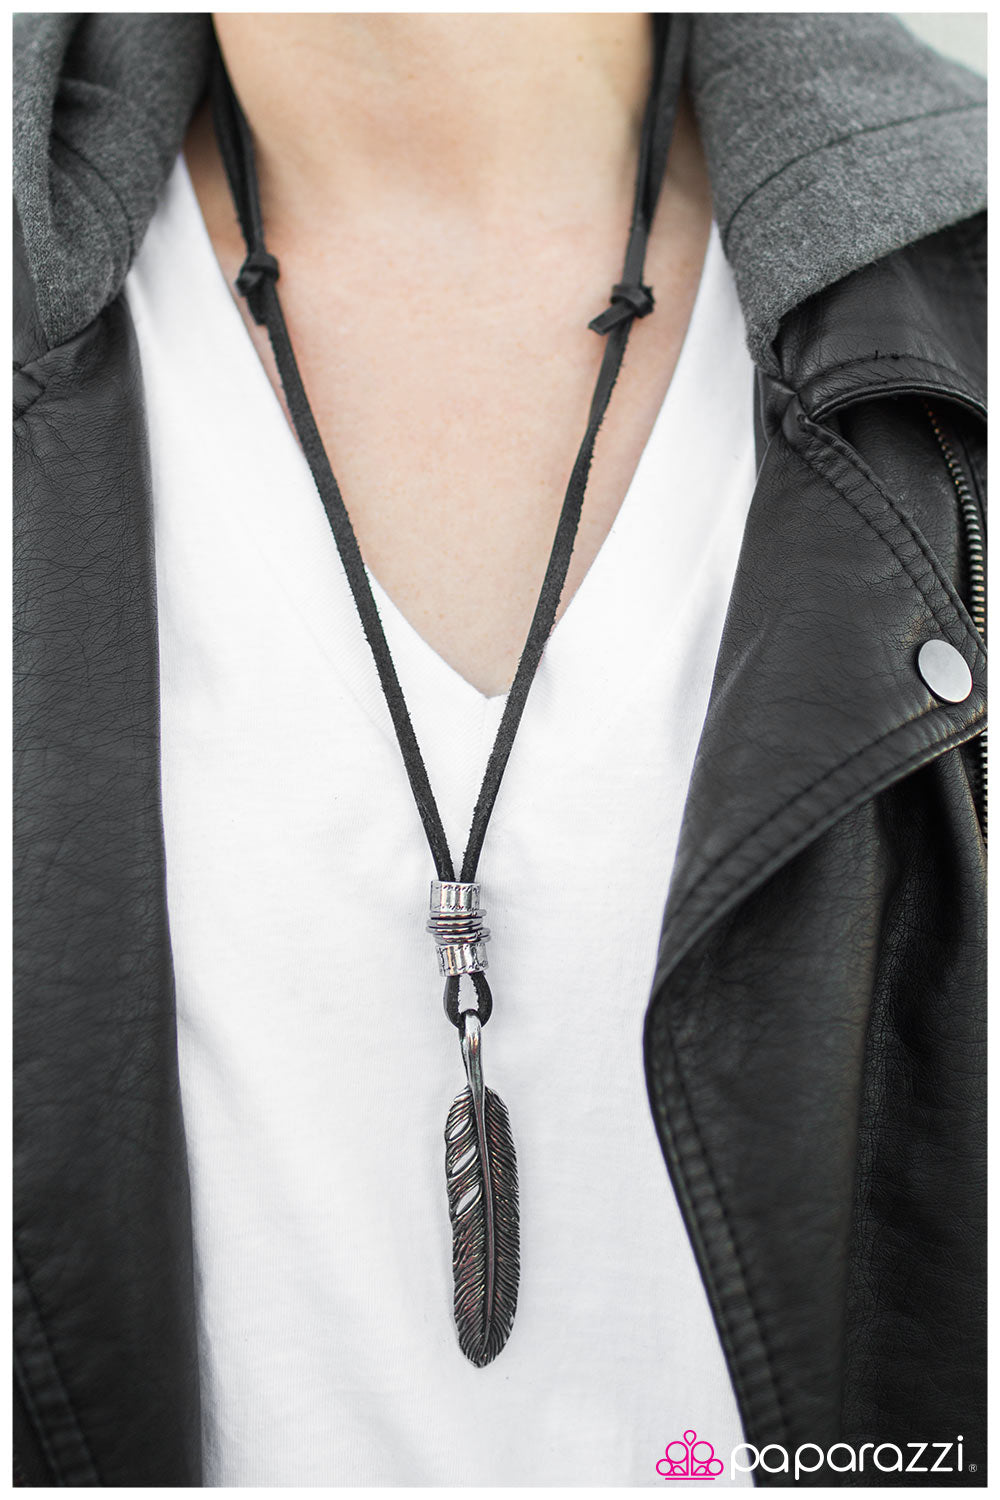 Looking Fly - Paparazzi necklace